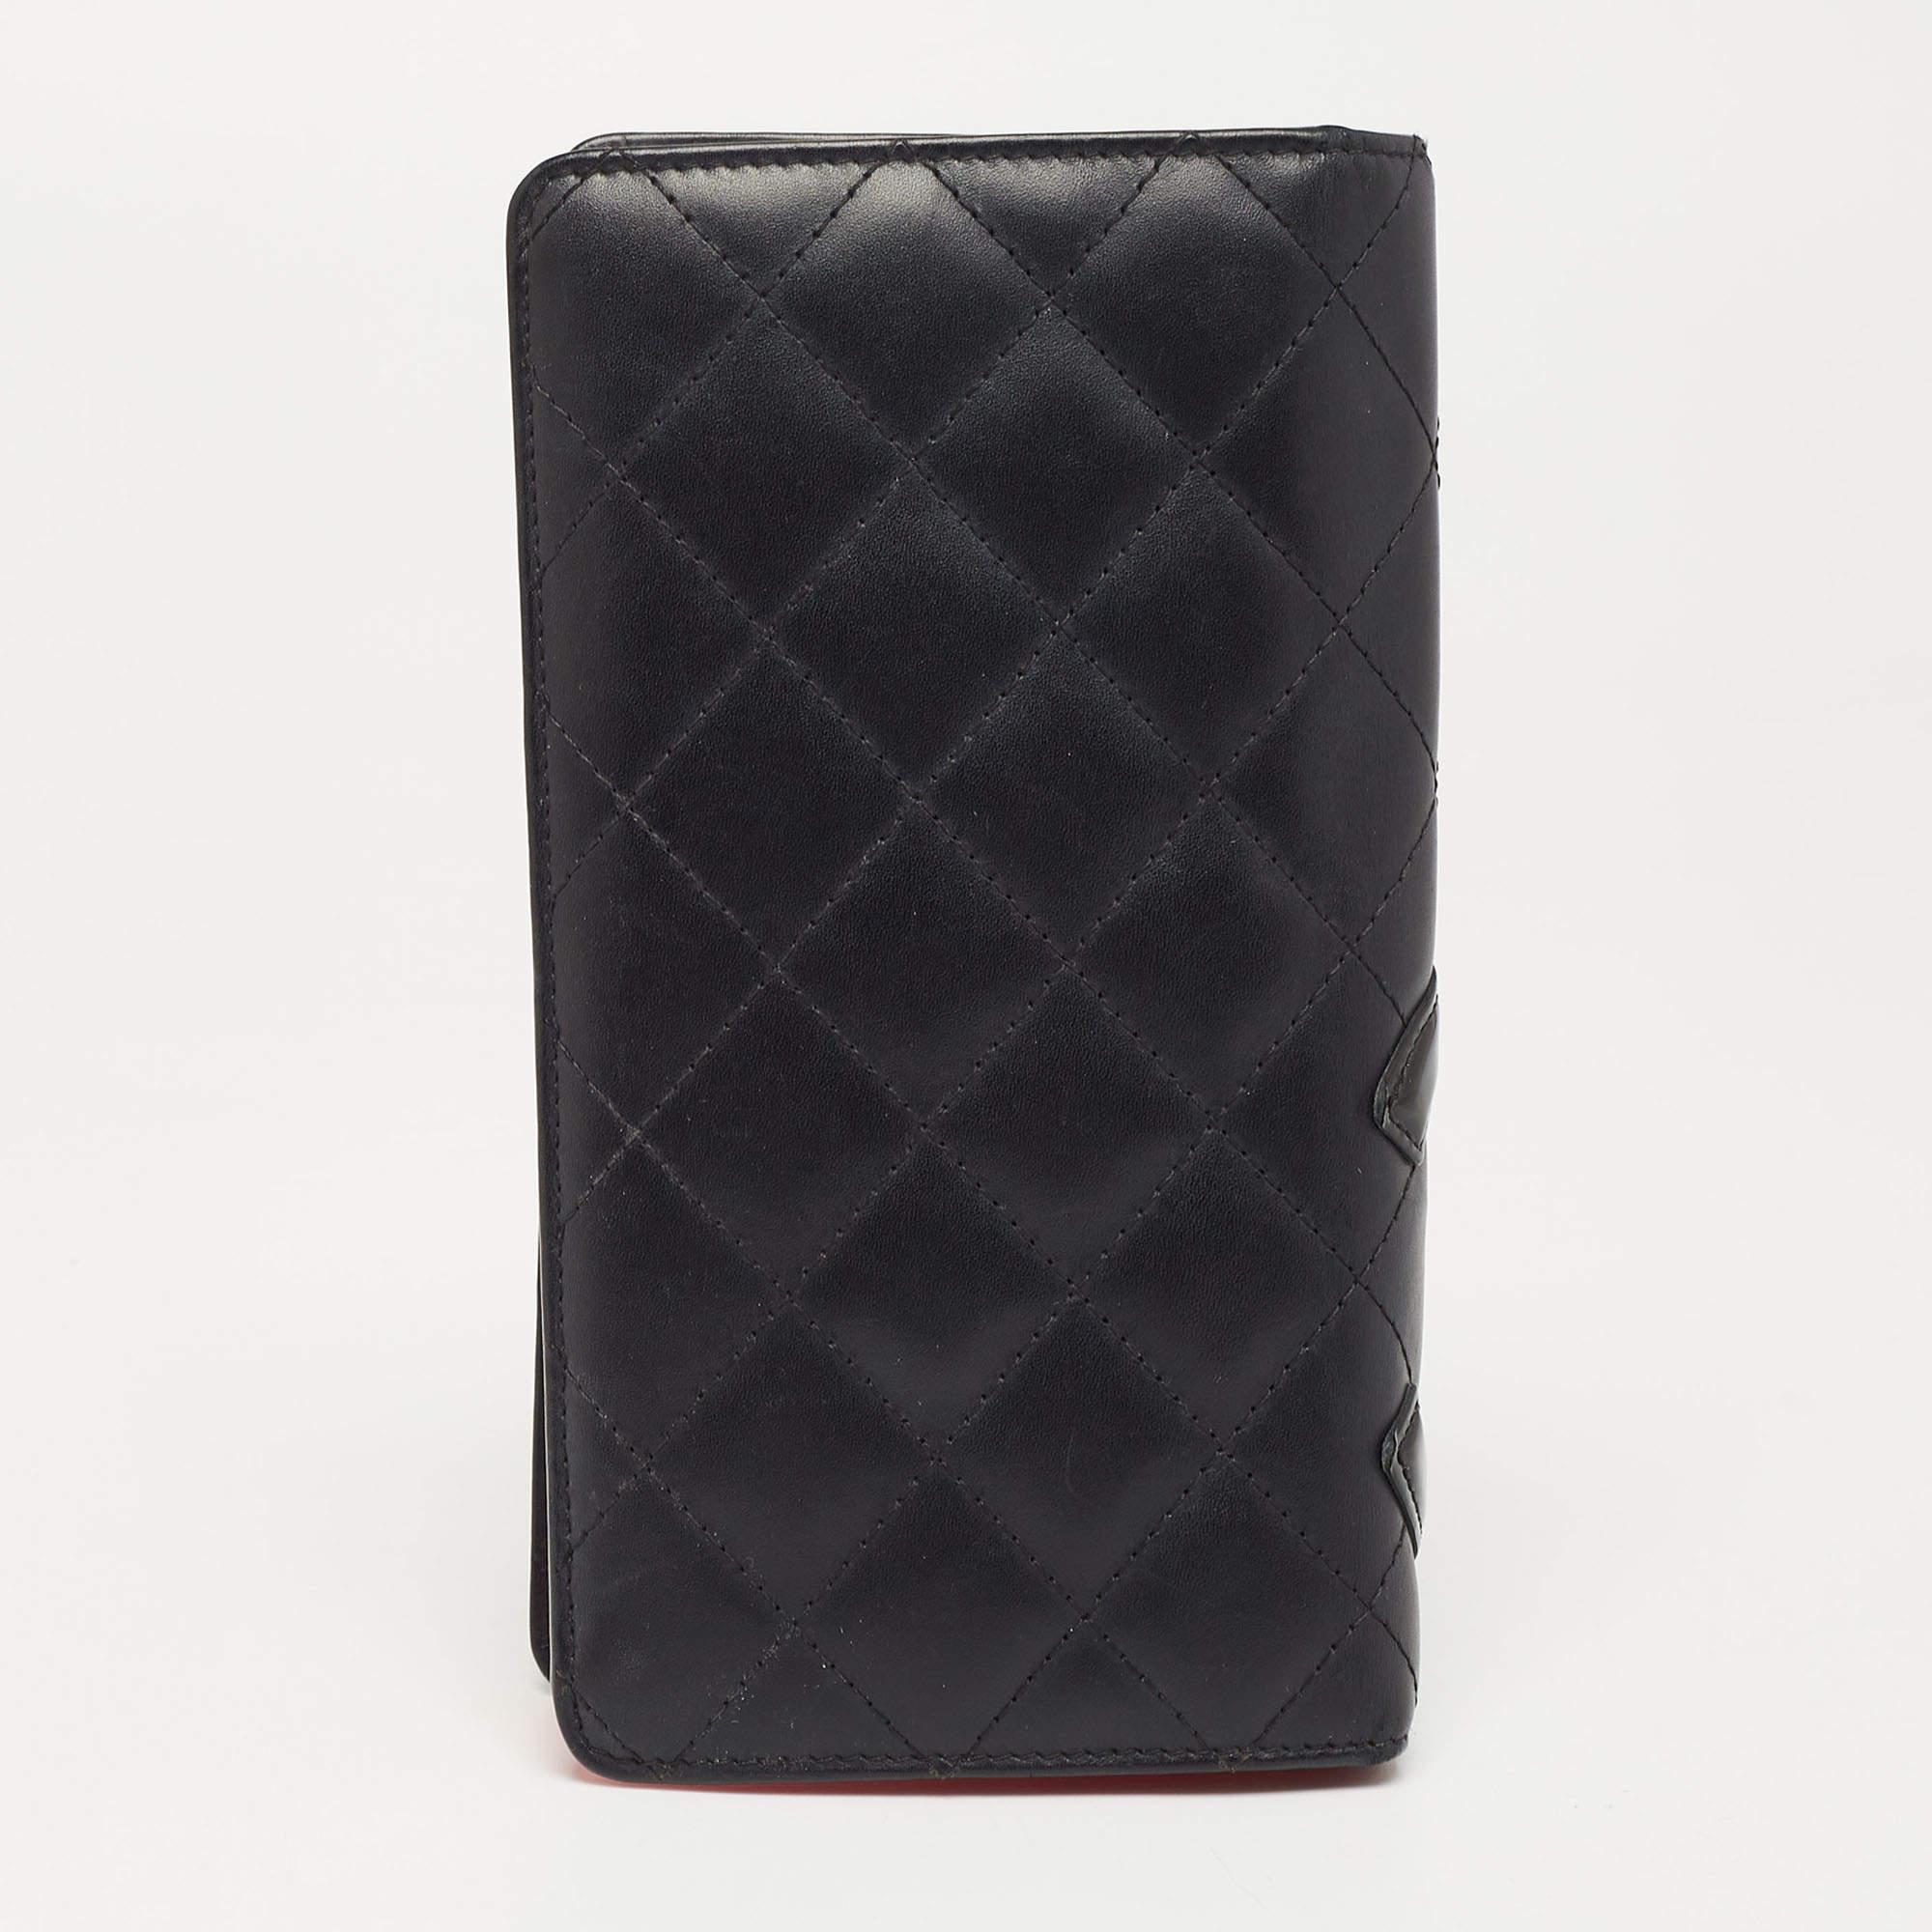 Chanel continues its history of delivering finely crafted accessories with this wallet. It has been crafted from black leather and shaped beautifully. The Cambon Ligne wallet has the CC logo on the exterior.

Includes: Original Dustbag, Authenticity